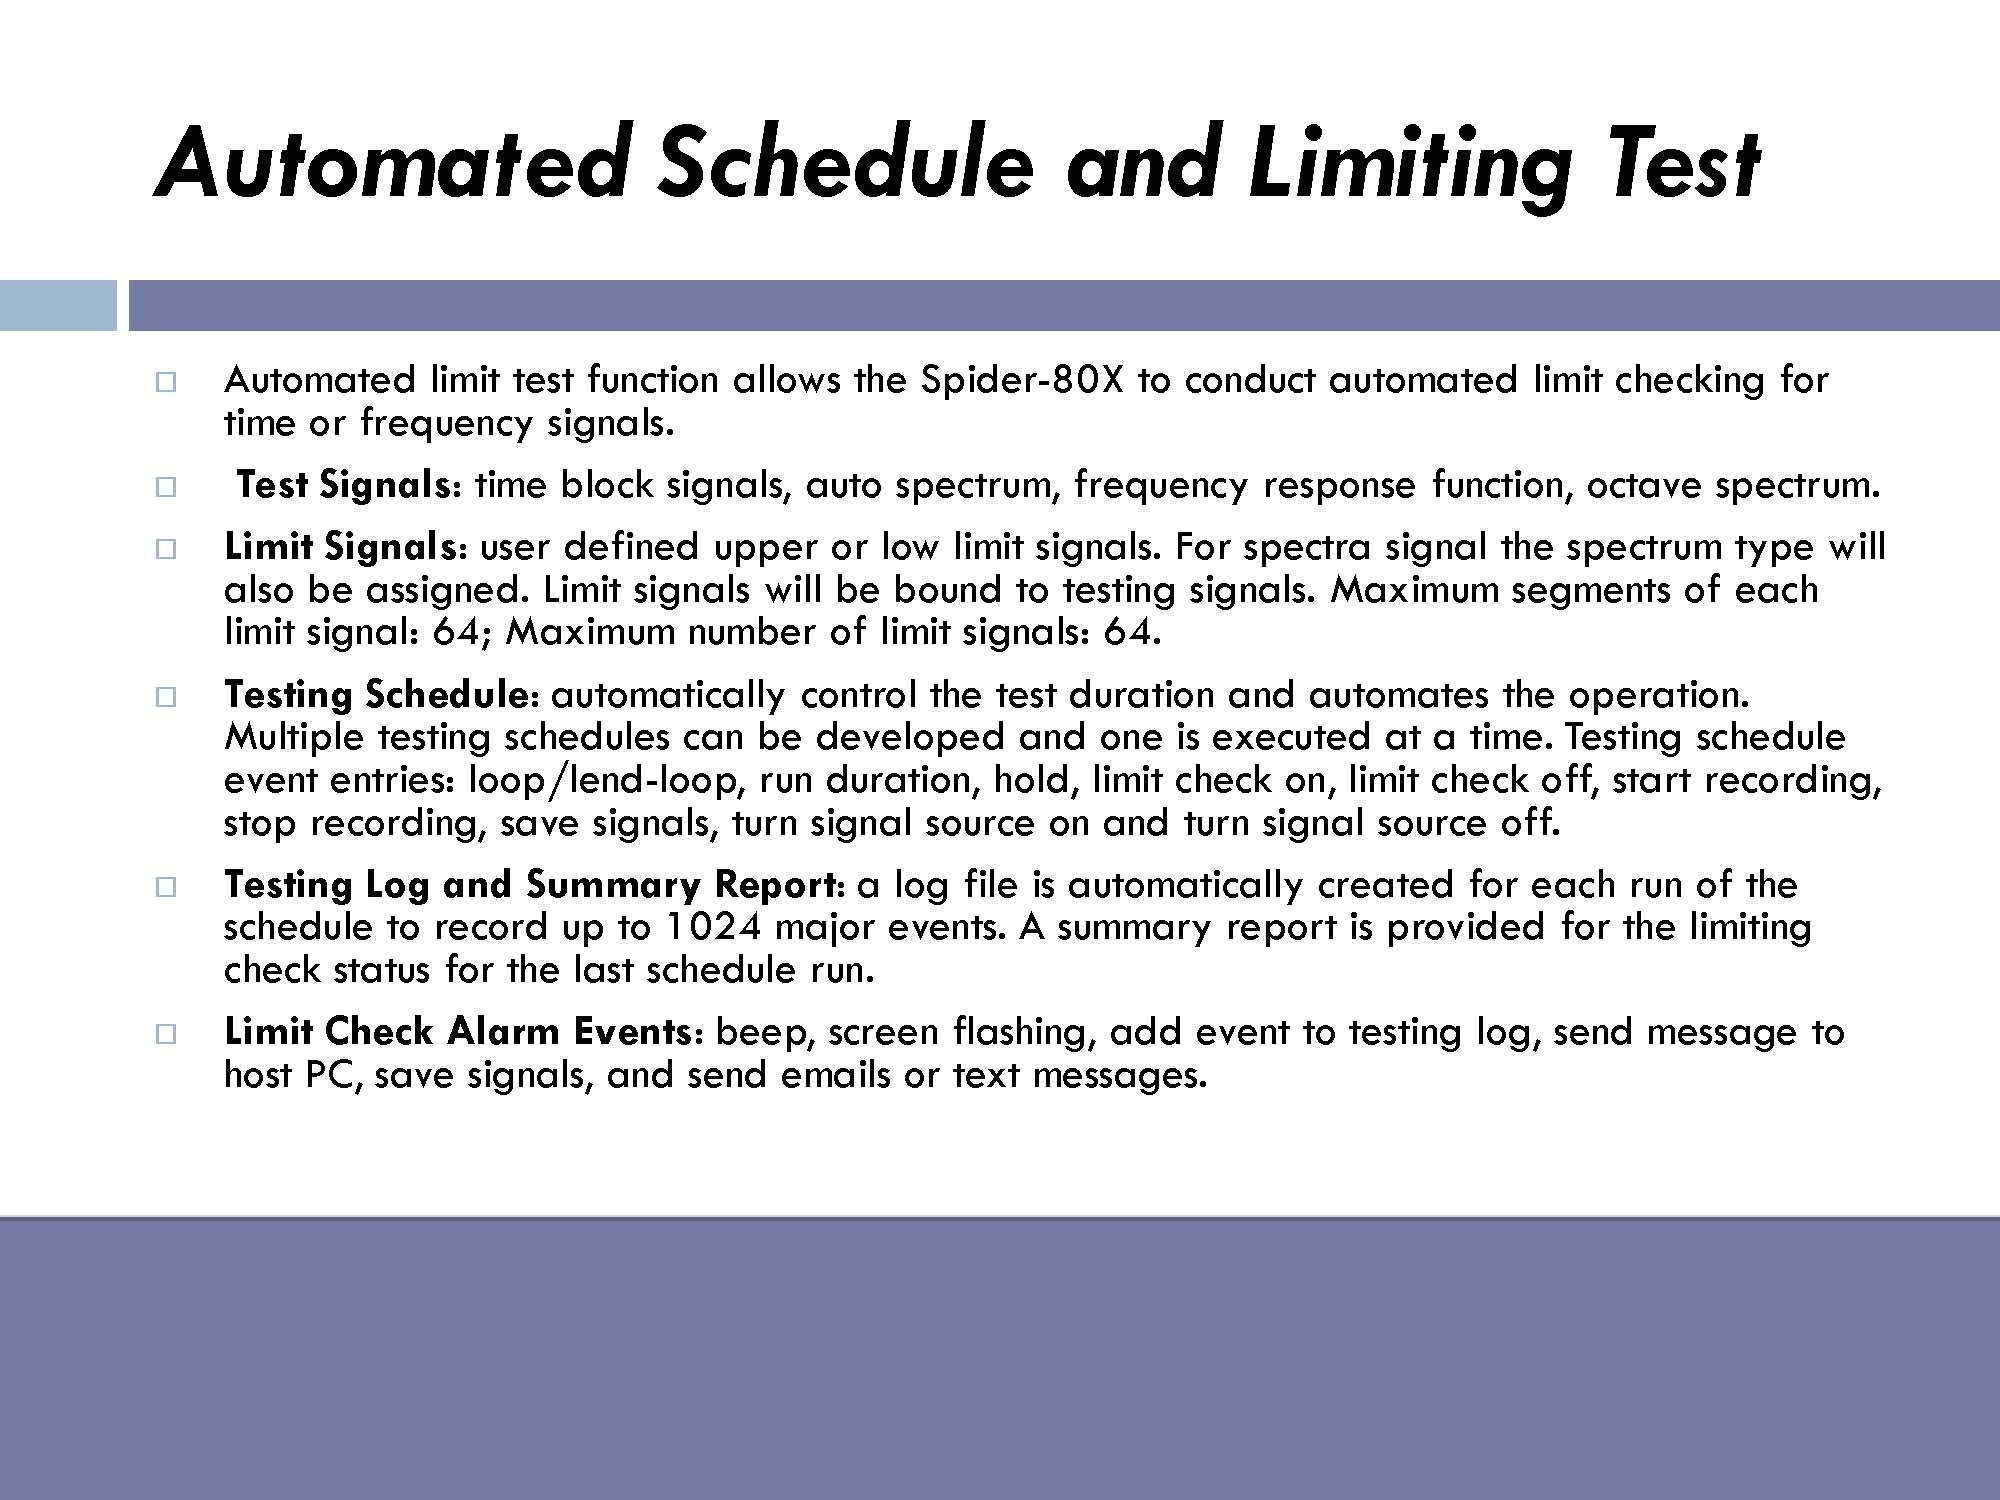   Automated limit test function allows the Spider-80X to conduct automated limit checking for time or frequency signals. &nbsp;      &nbsp; Test Signals : time block signals, auto spectrum, frequency response function, octave spectrum.      Limit Sig